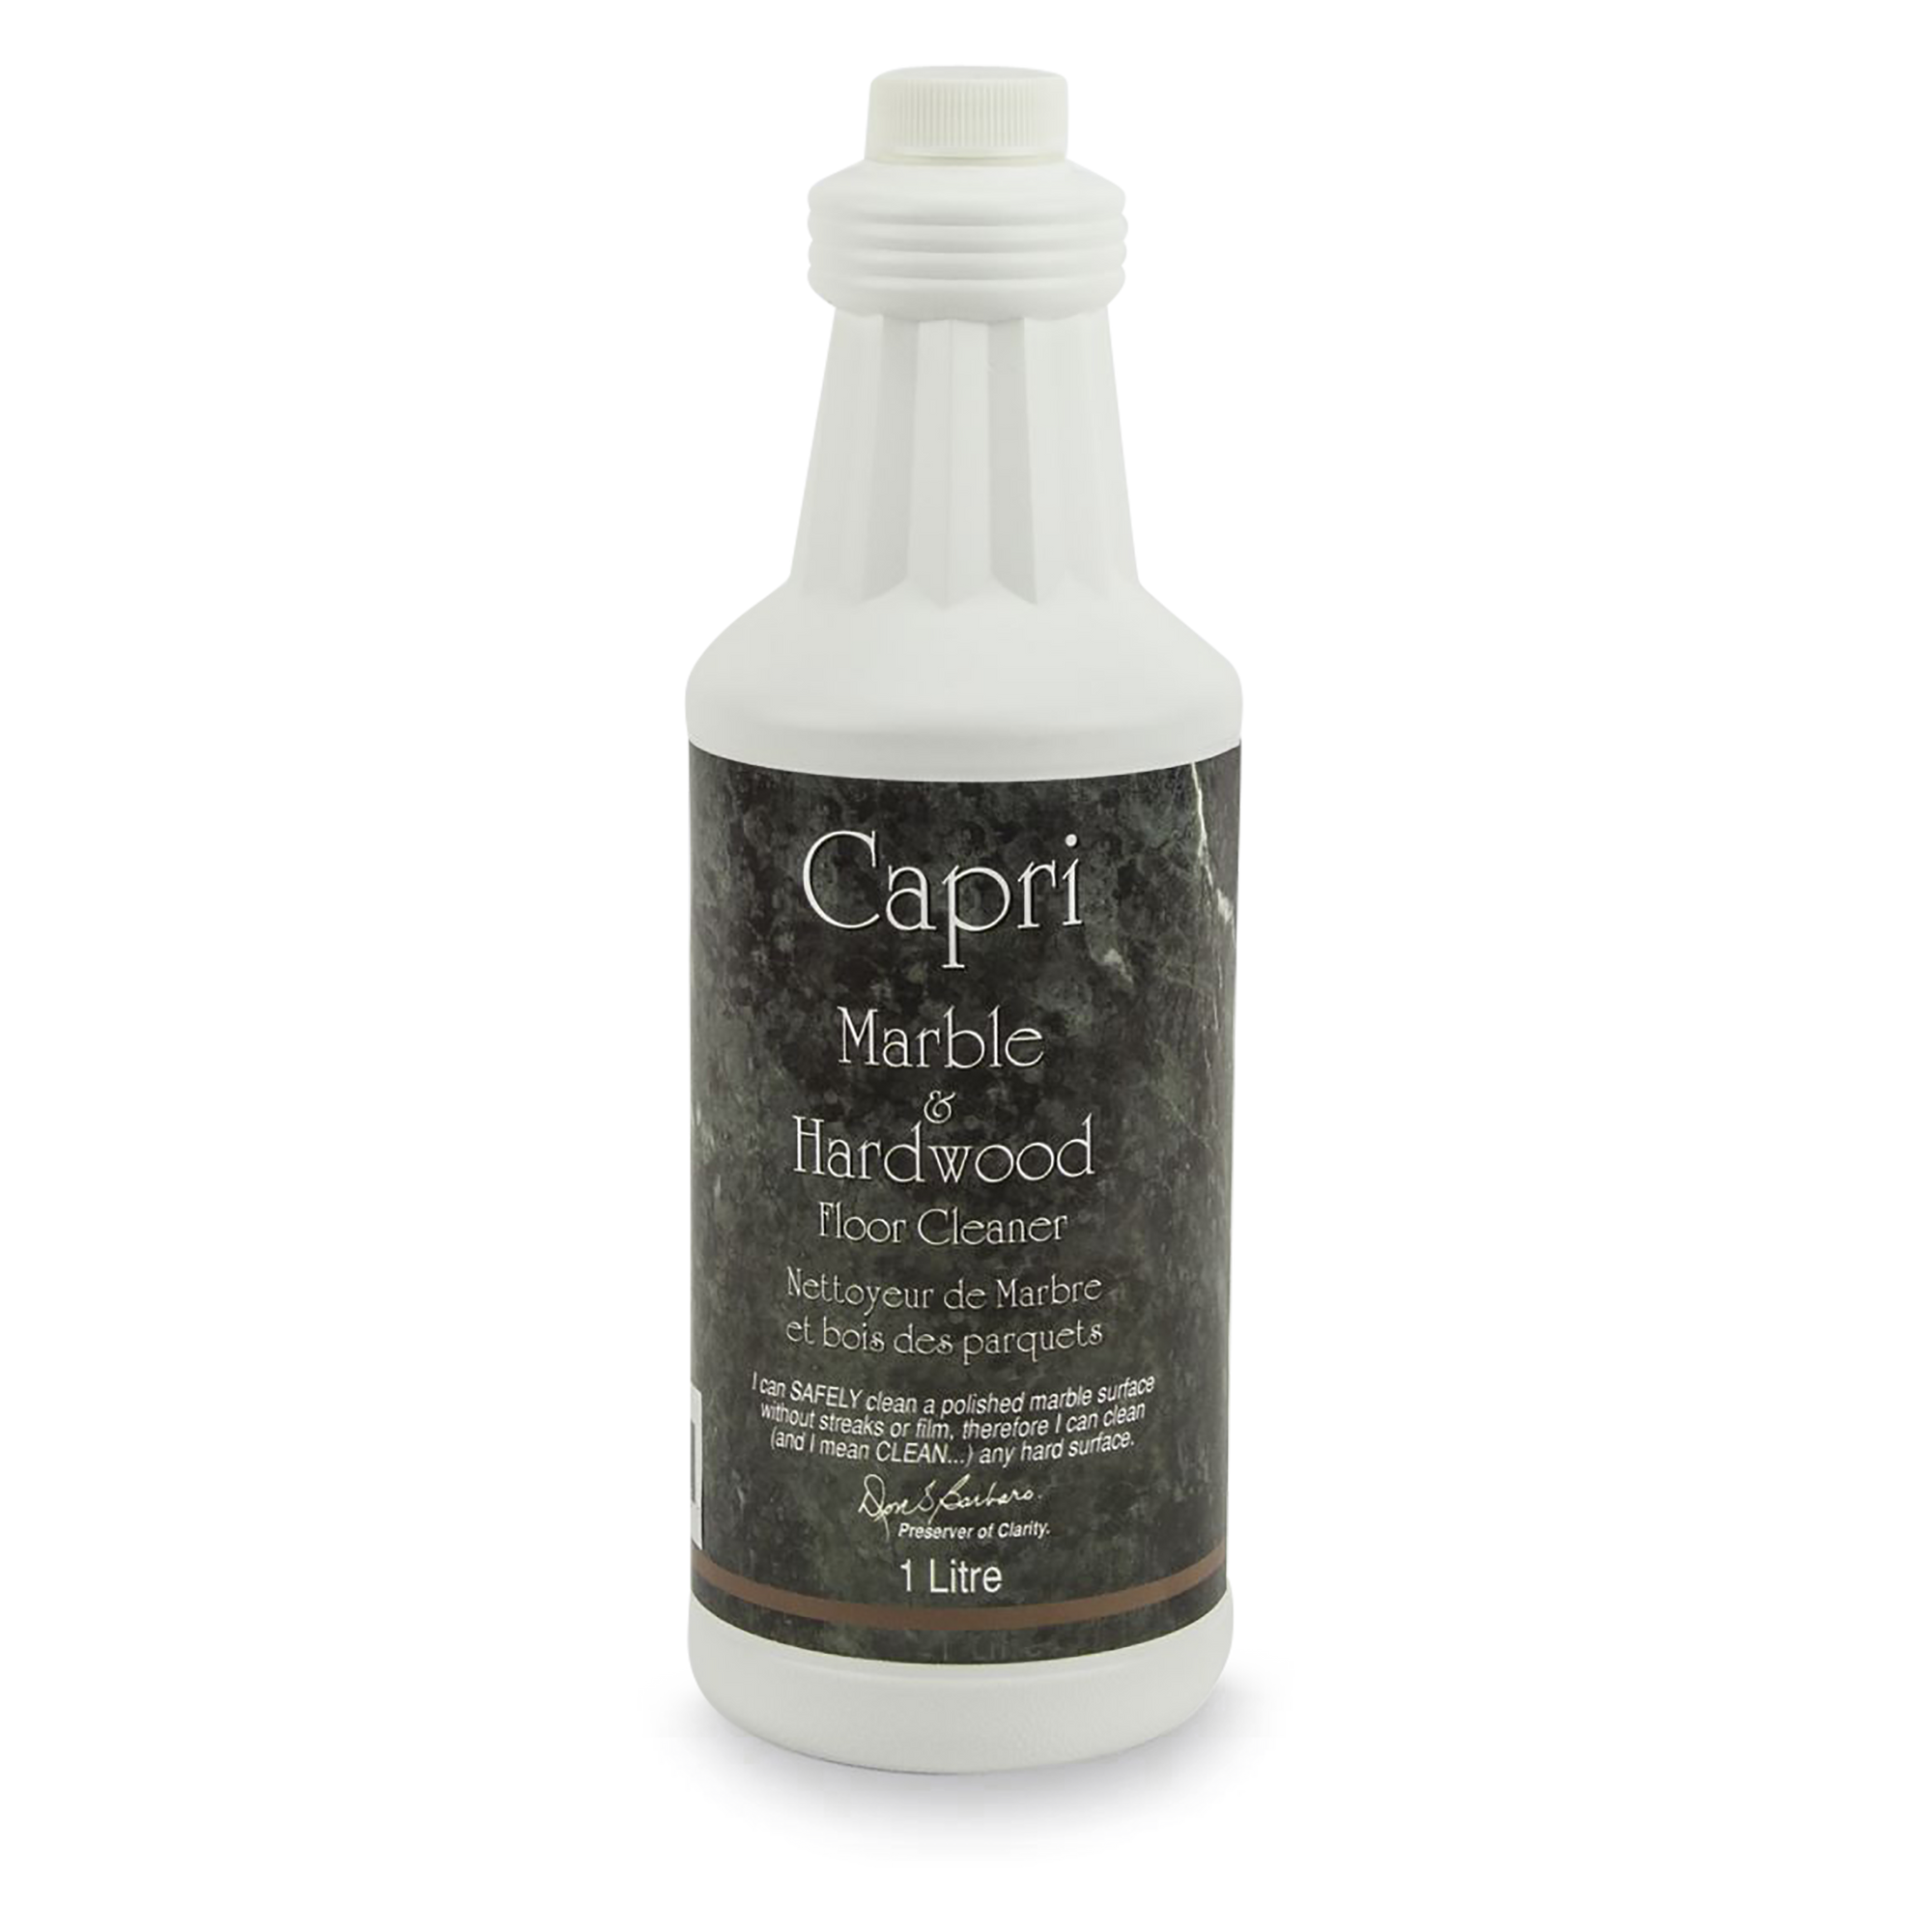 Capri Marble and Hardwood Floor Cleaner safely and easily cleans sensitive polished and hard surfaces.